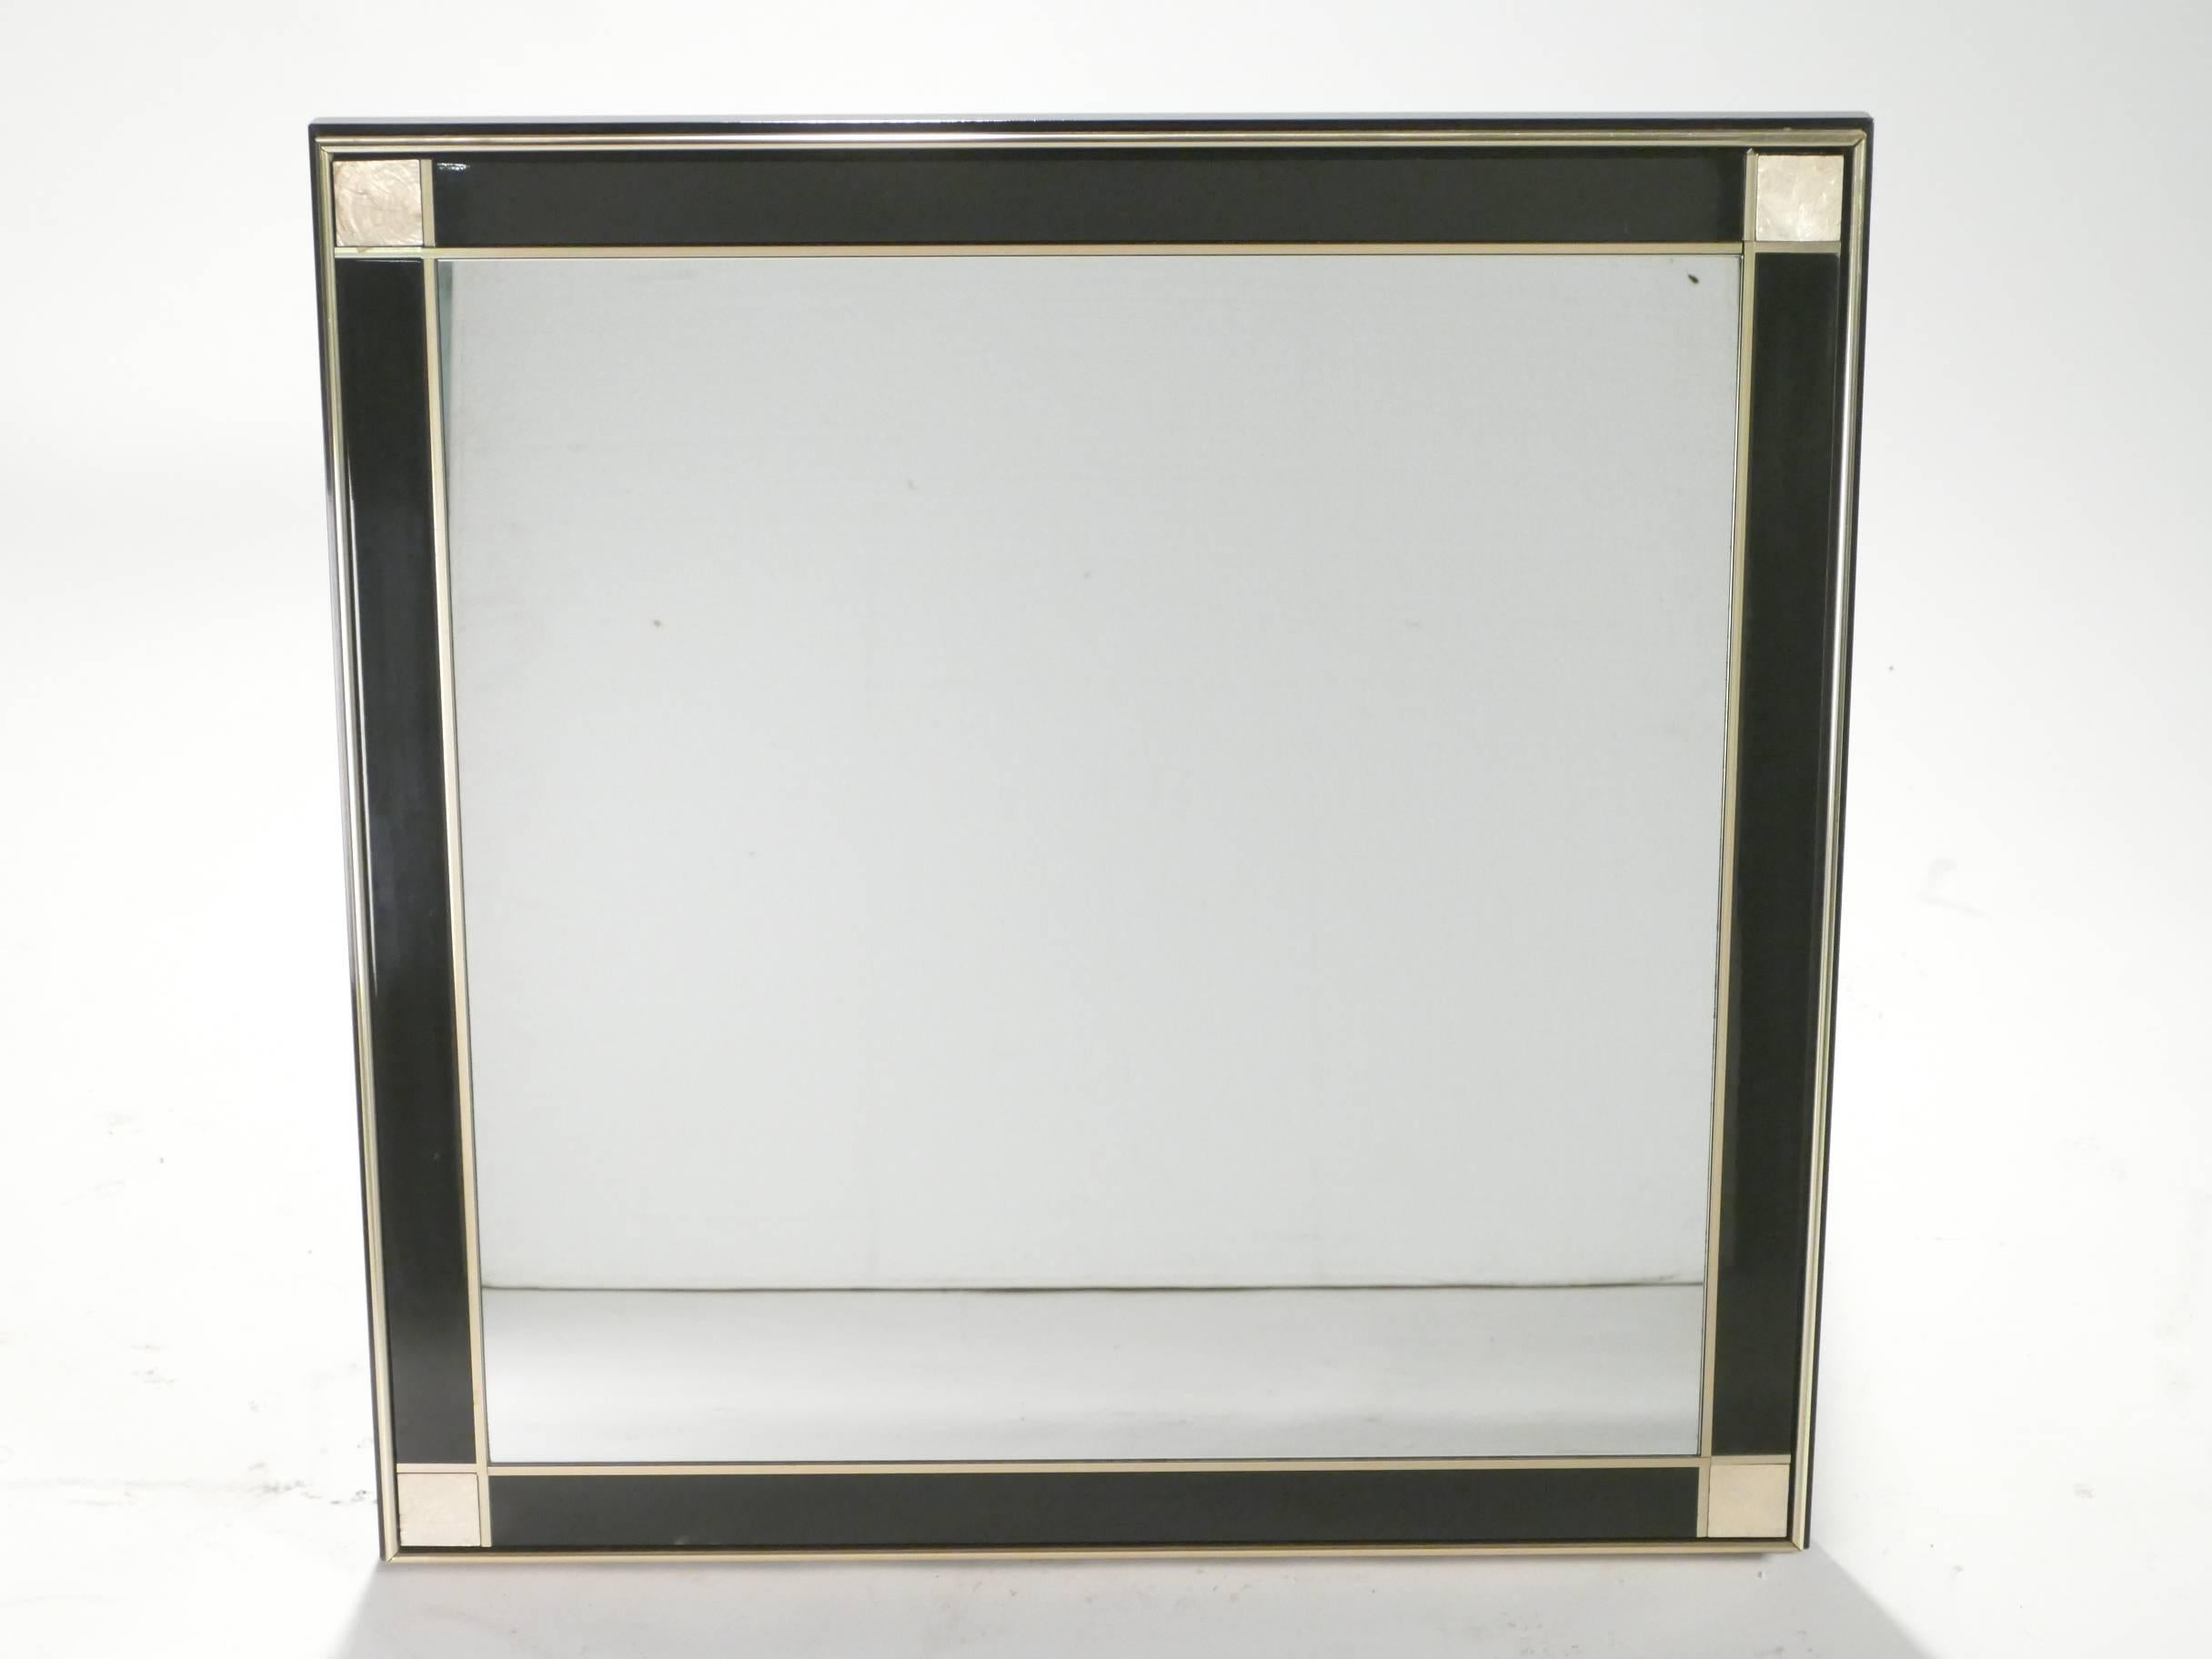 This beautiful, rectangular wall mirror is made with high-quality brass and black lacquer. The thin, bright brass lines around the mirror’s border and the brass square panels in each corner create an artsy, geometrical feel about the piece, without